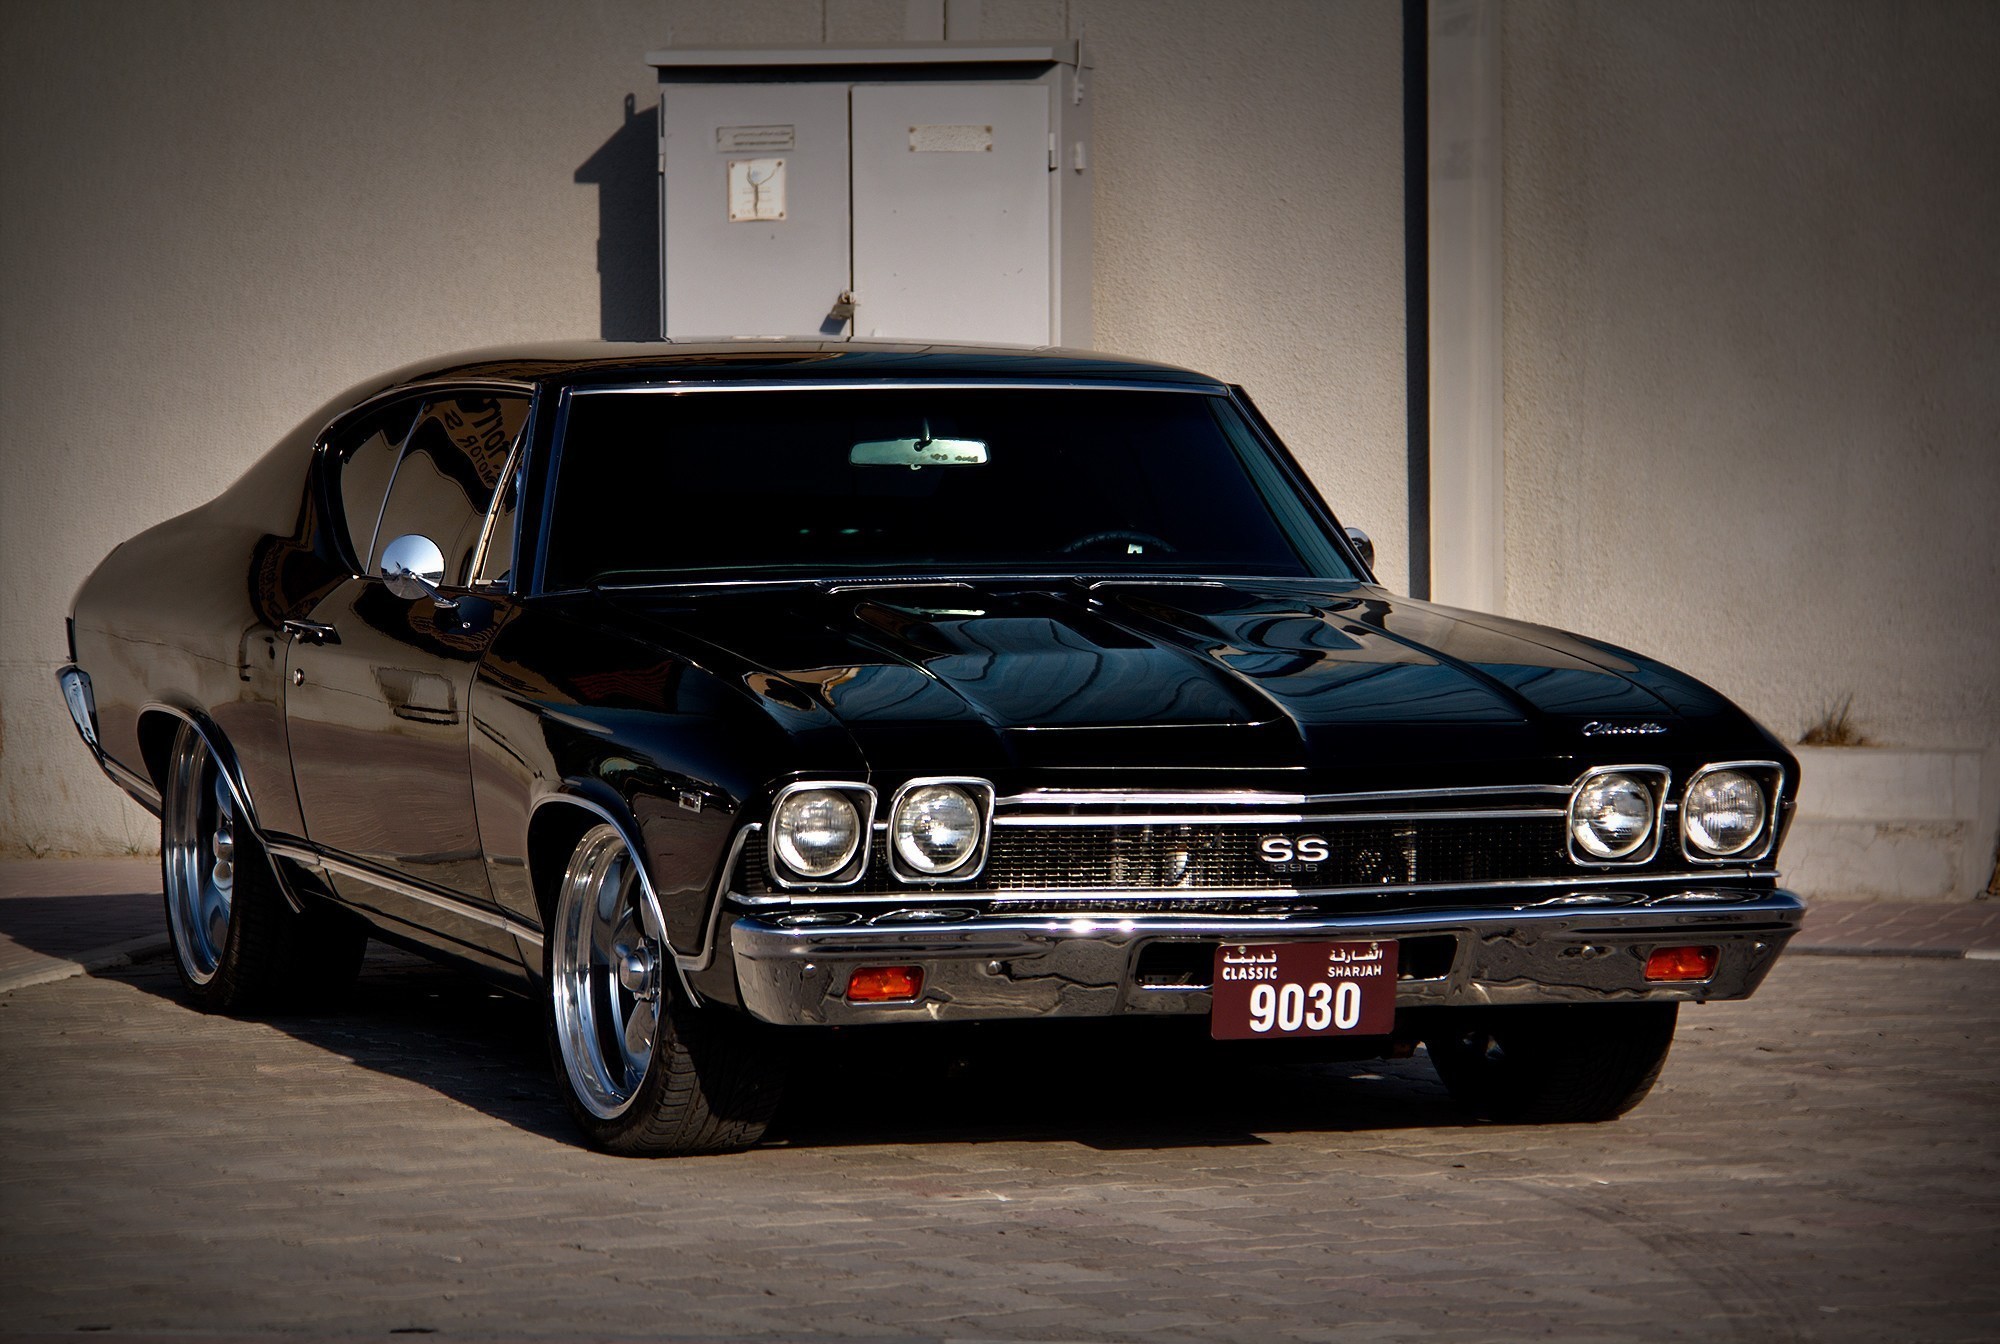 Chevrolet Chevelle Ss Wallpapers